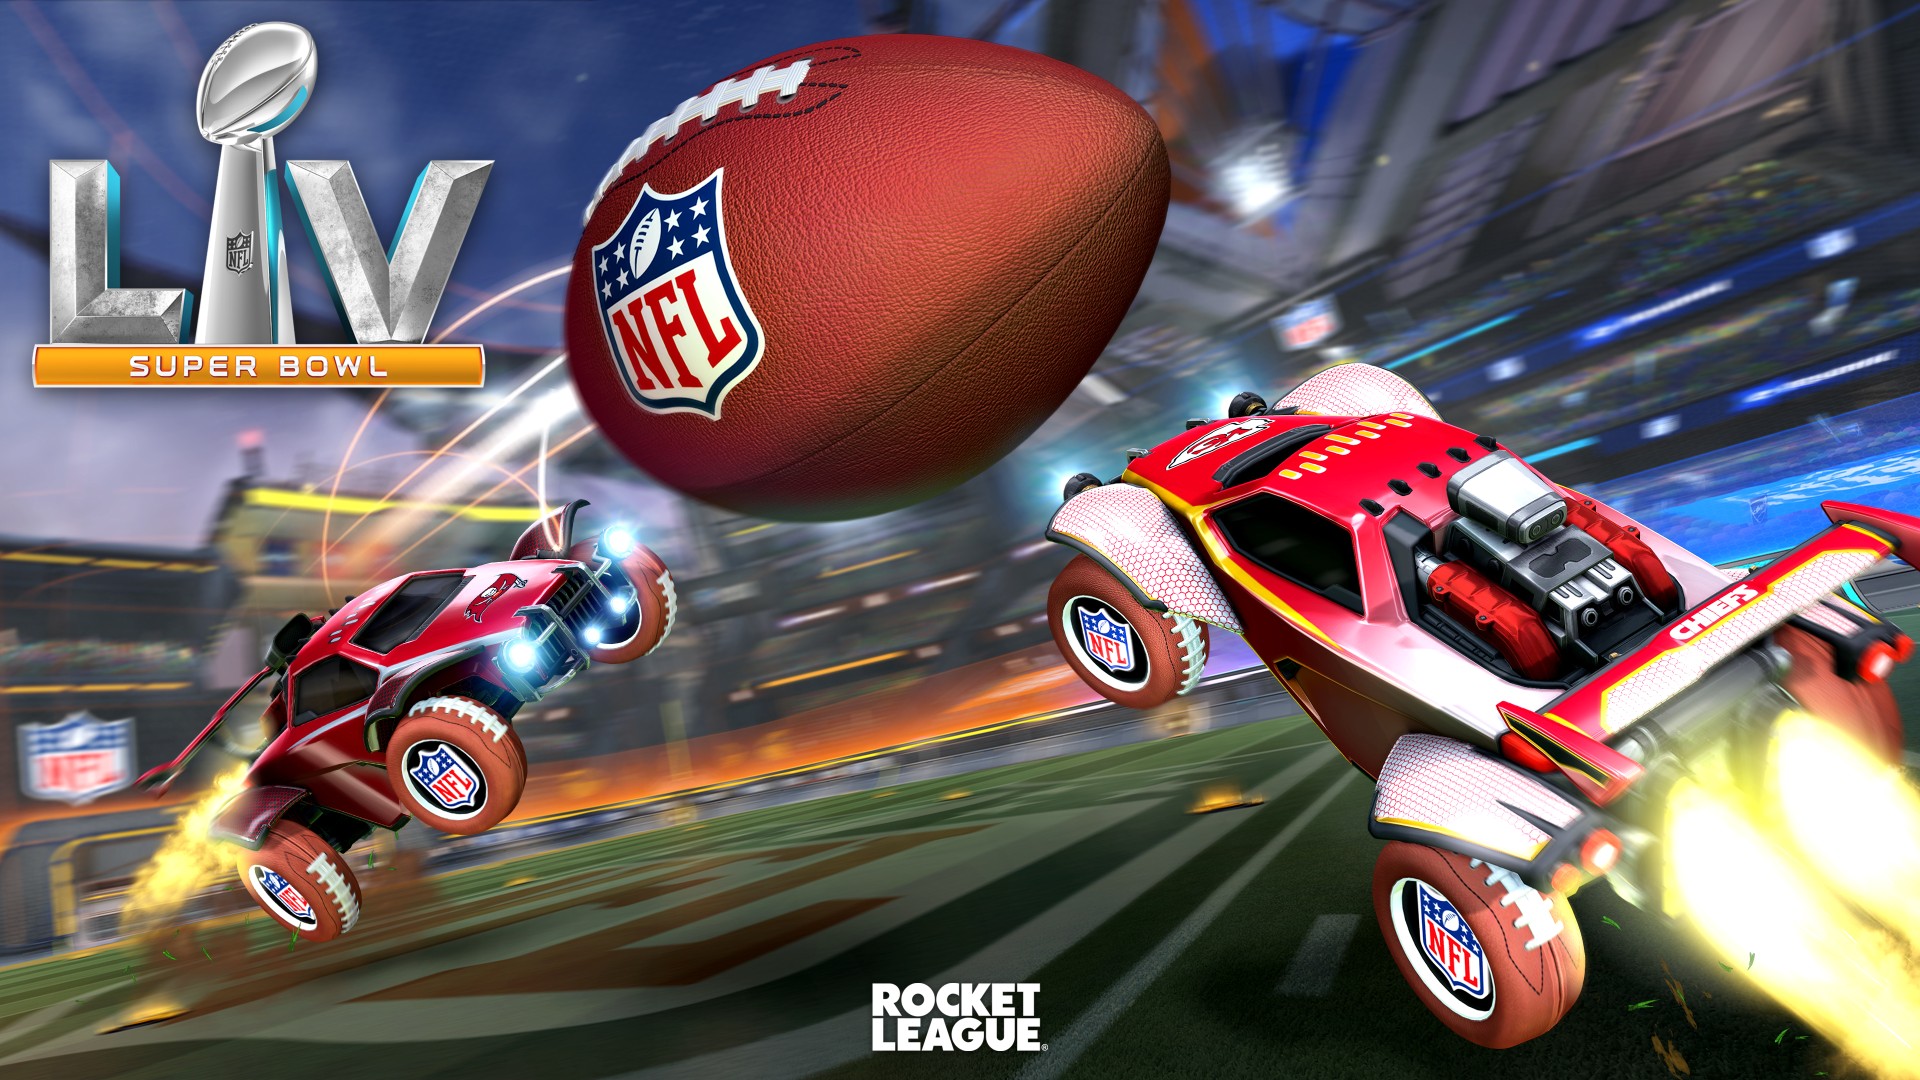 Rocket League Launches E-Sports Site Celebrating Players and Tournaments  with